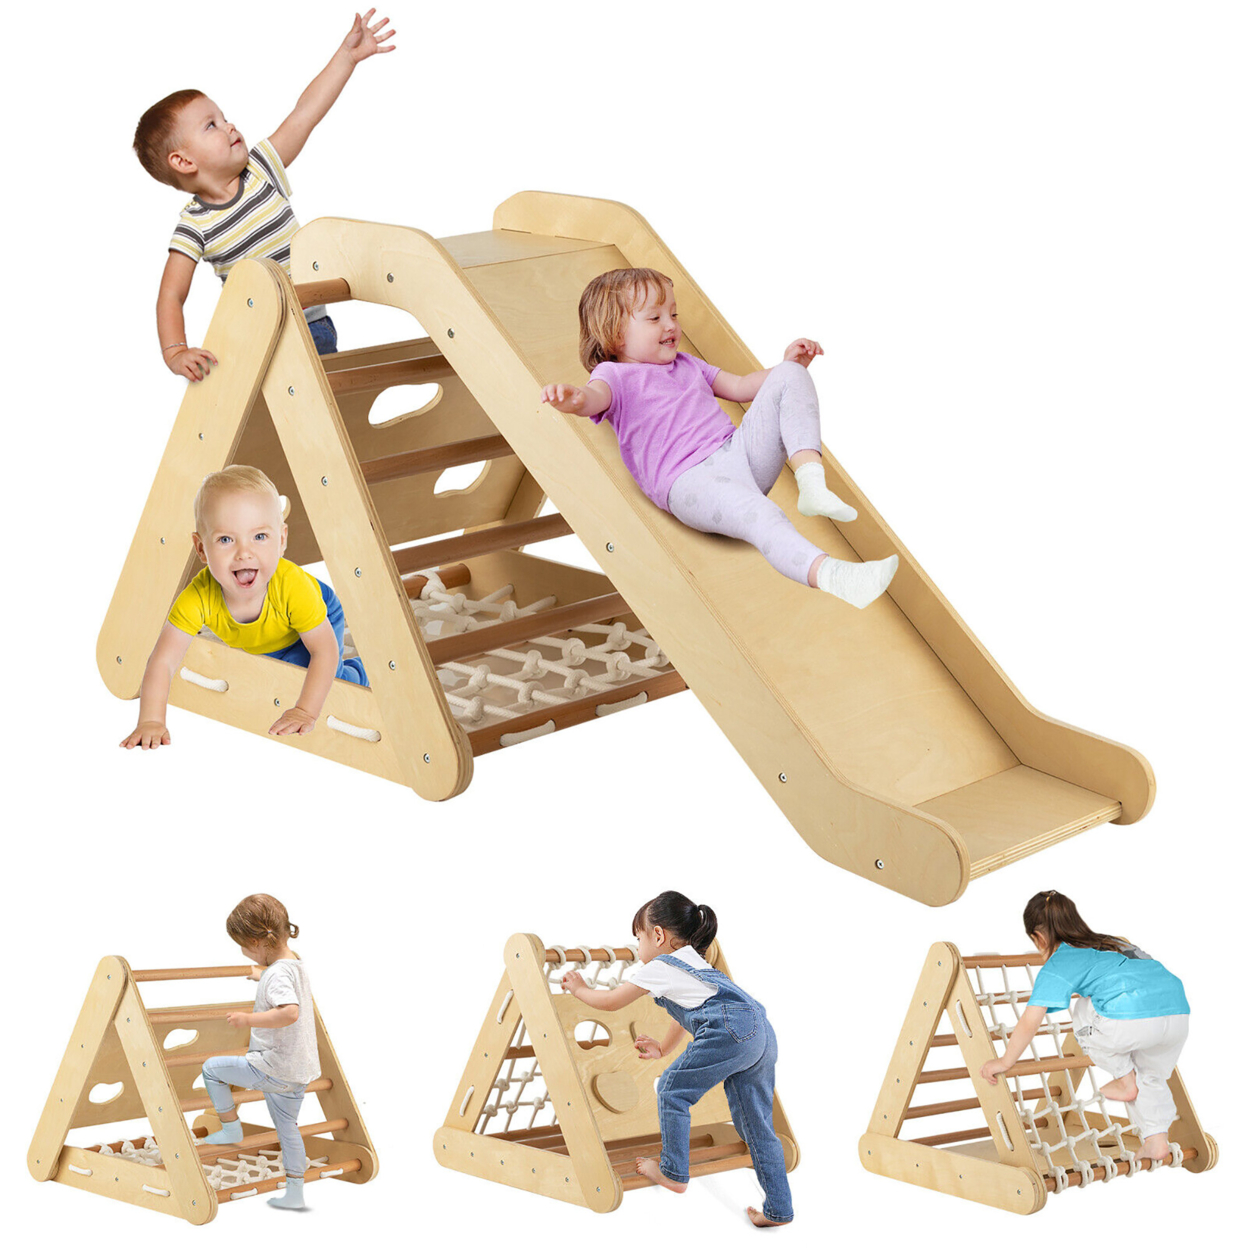 4 In 1 Wooden Climbing Triangle Set Triangle Climber W/ Ramp - Natural